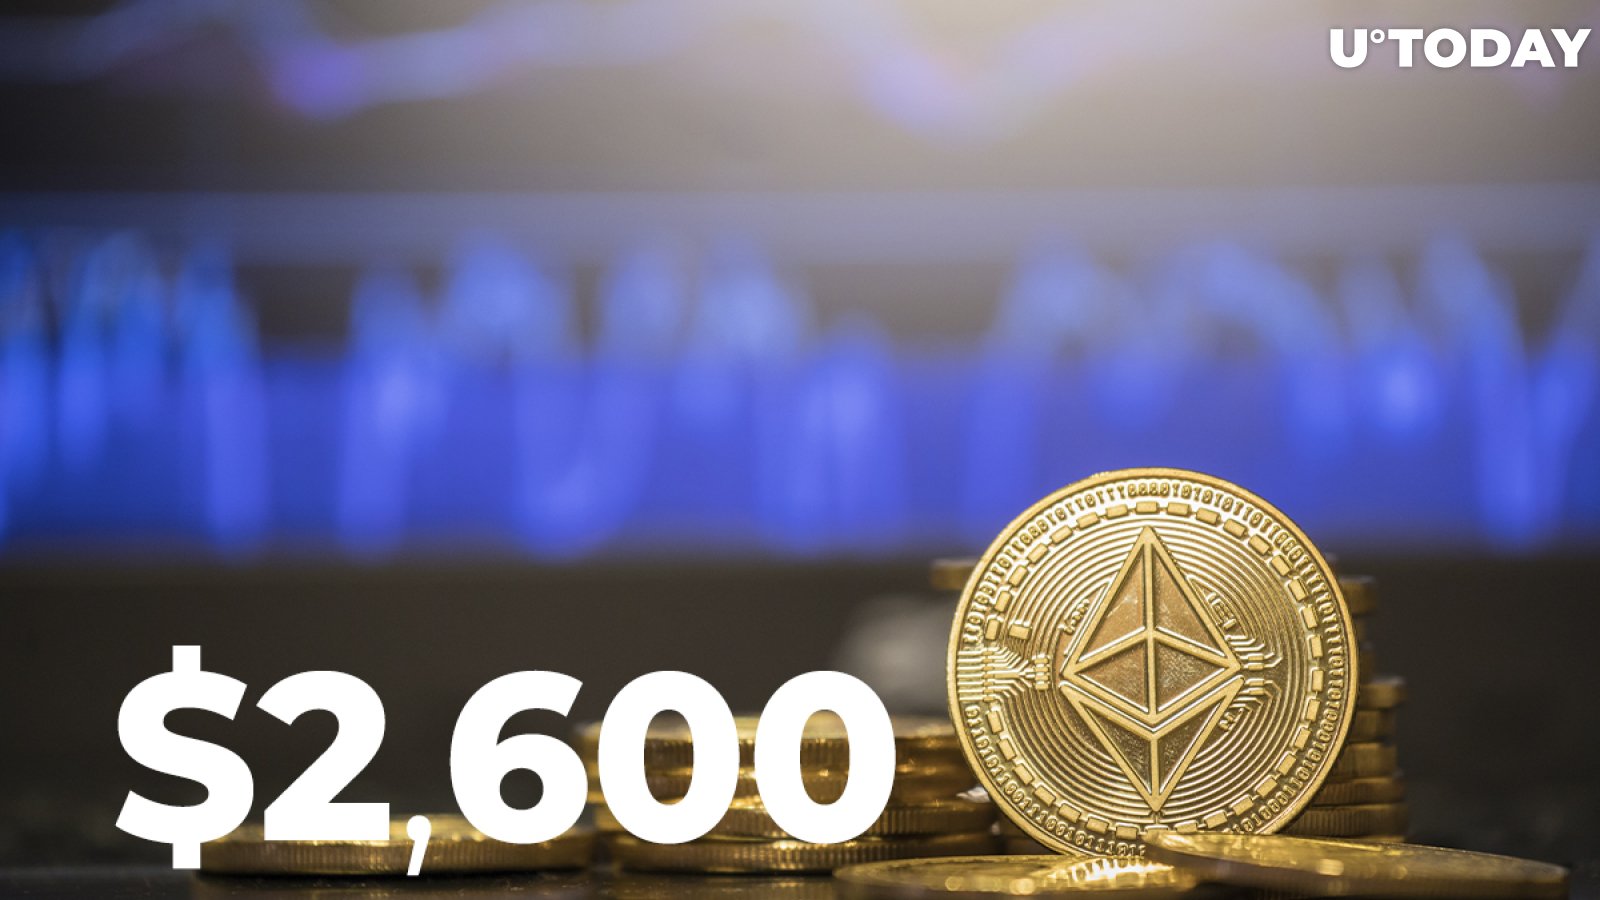 Ethereum Surpasses $2,600 as "Greed" Takes Over the Market